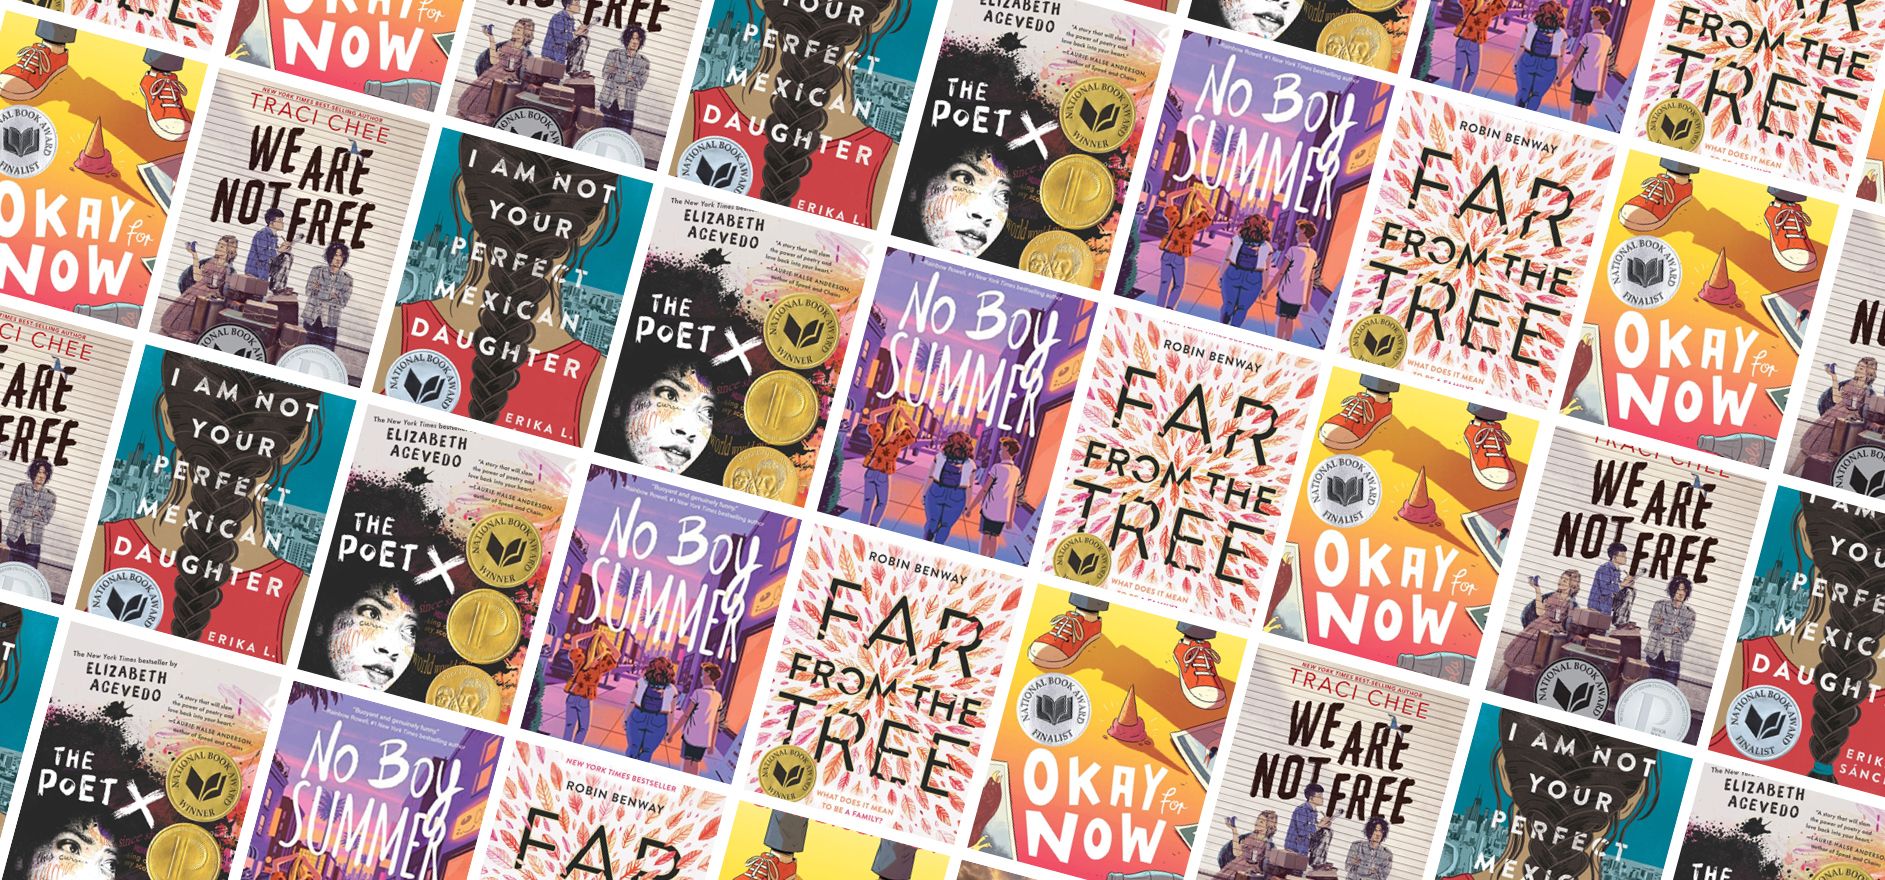 12 Laugh Out Loud Books You Won't Be Able to Put Down